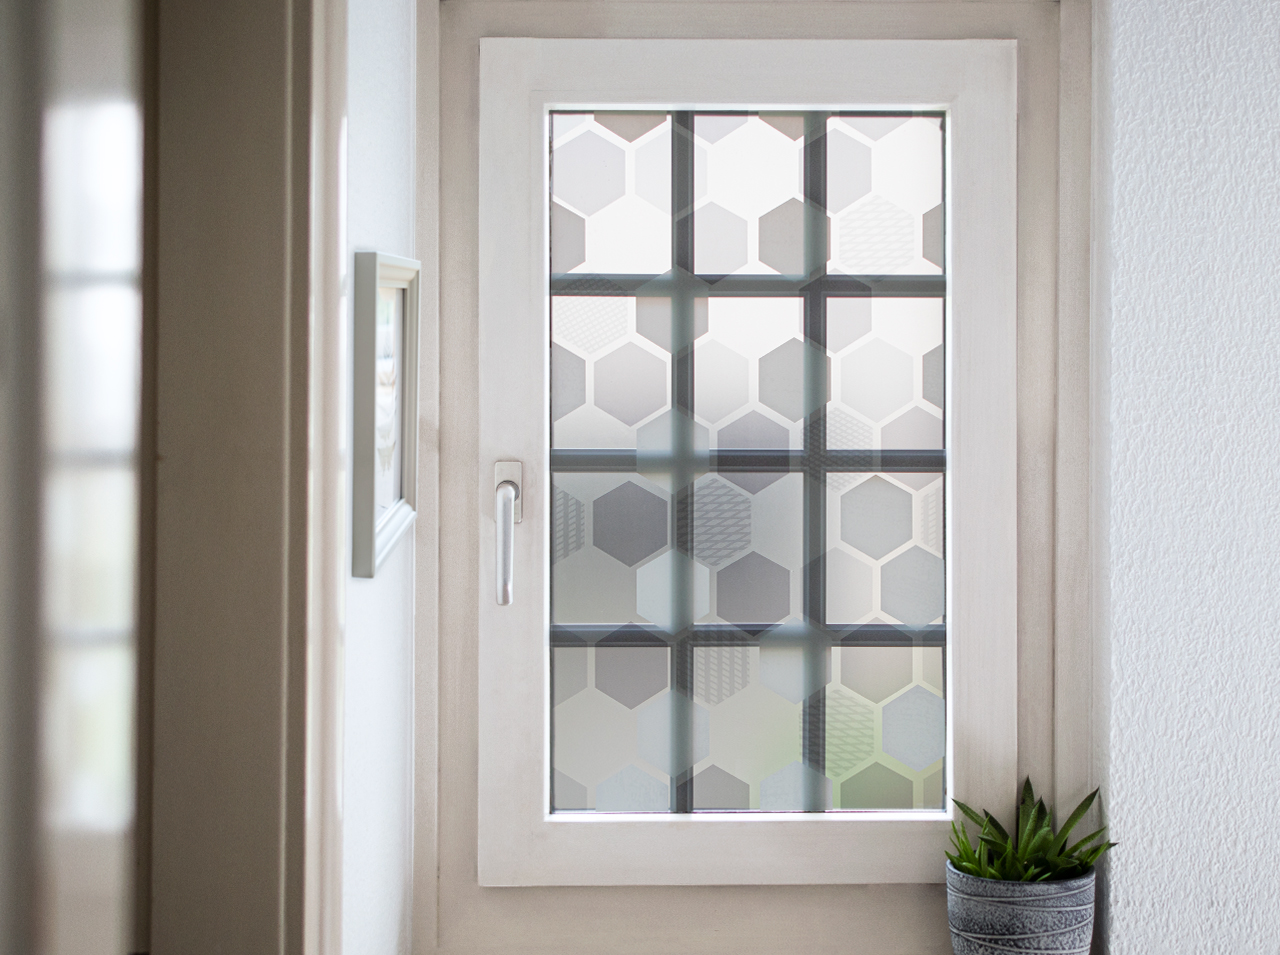 Window covered with opaque window foil in a honeycomb design in the colors white, gray and mint.